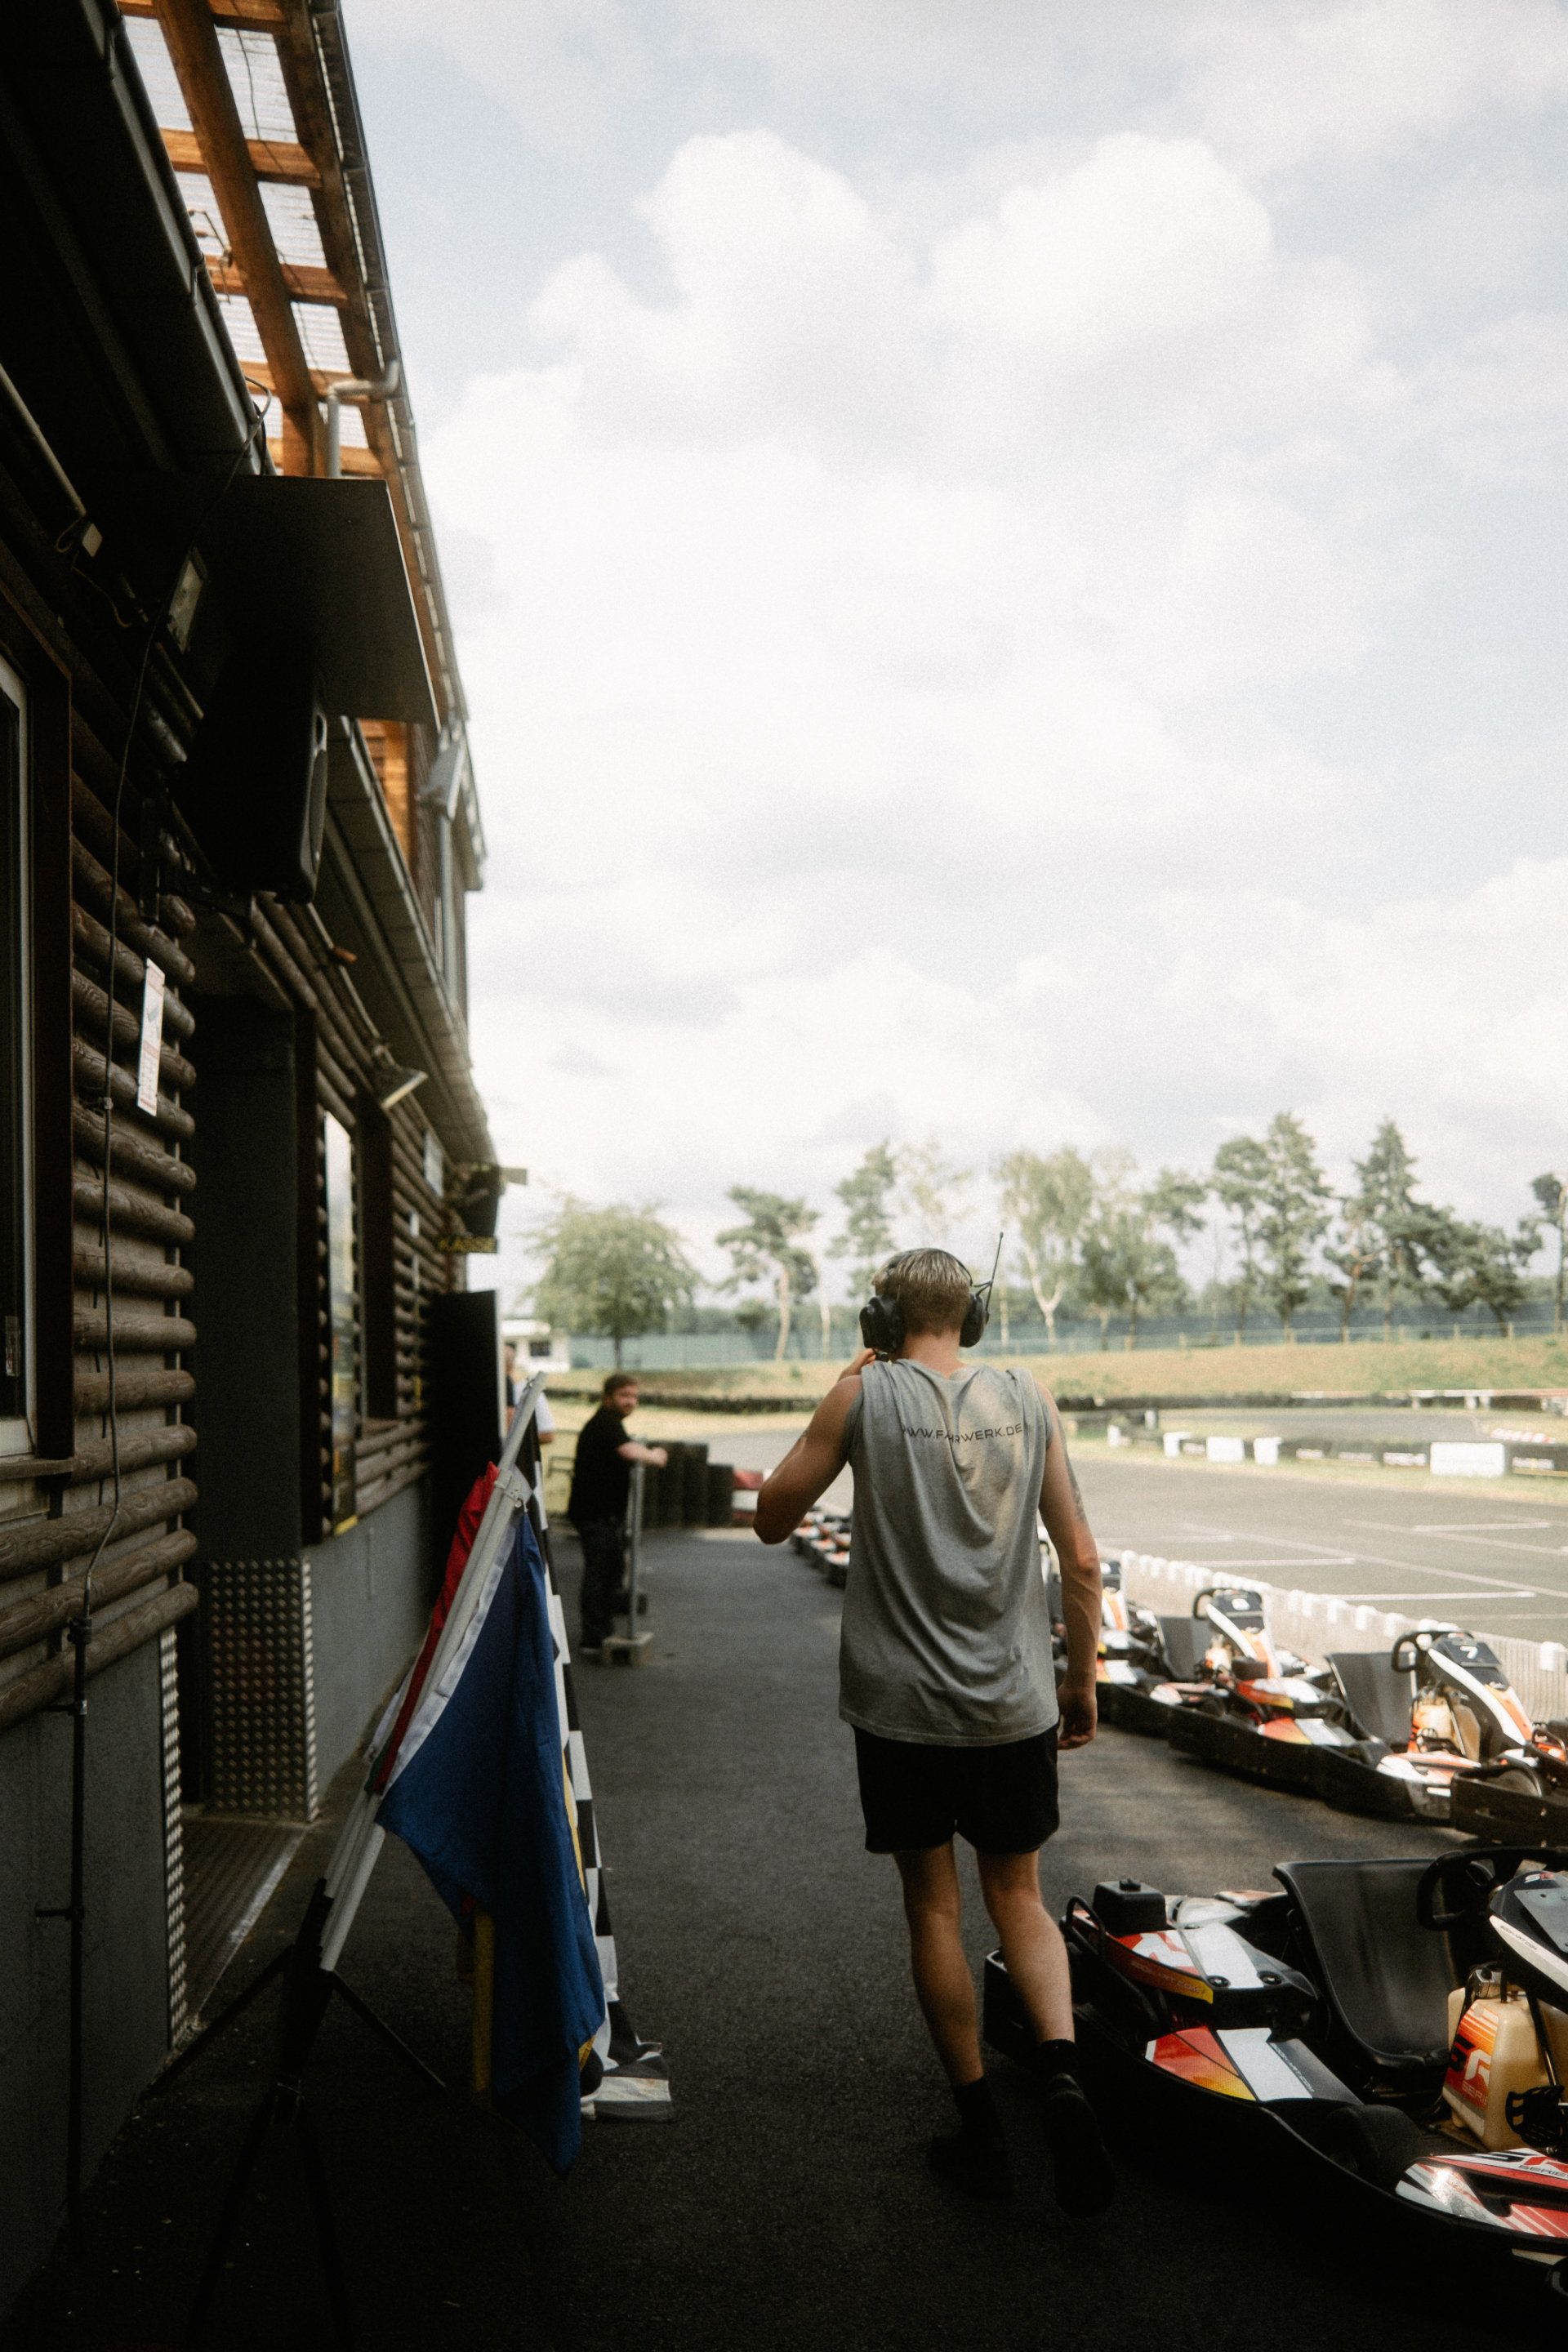 A person strolling down the pit lane at a go-kart track, with go-karts lined up ready for action, while a videographer captures every dynamic moment.